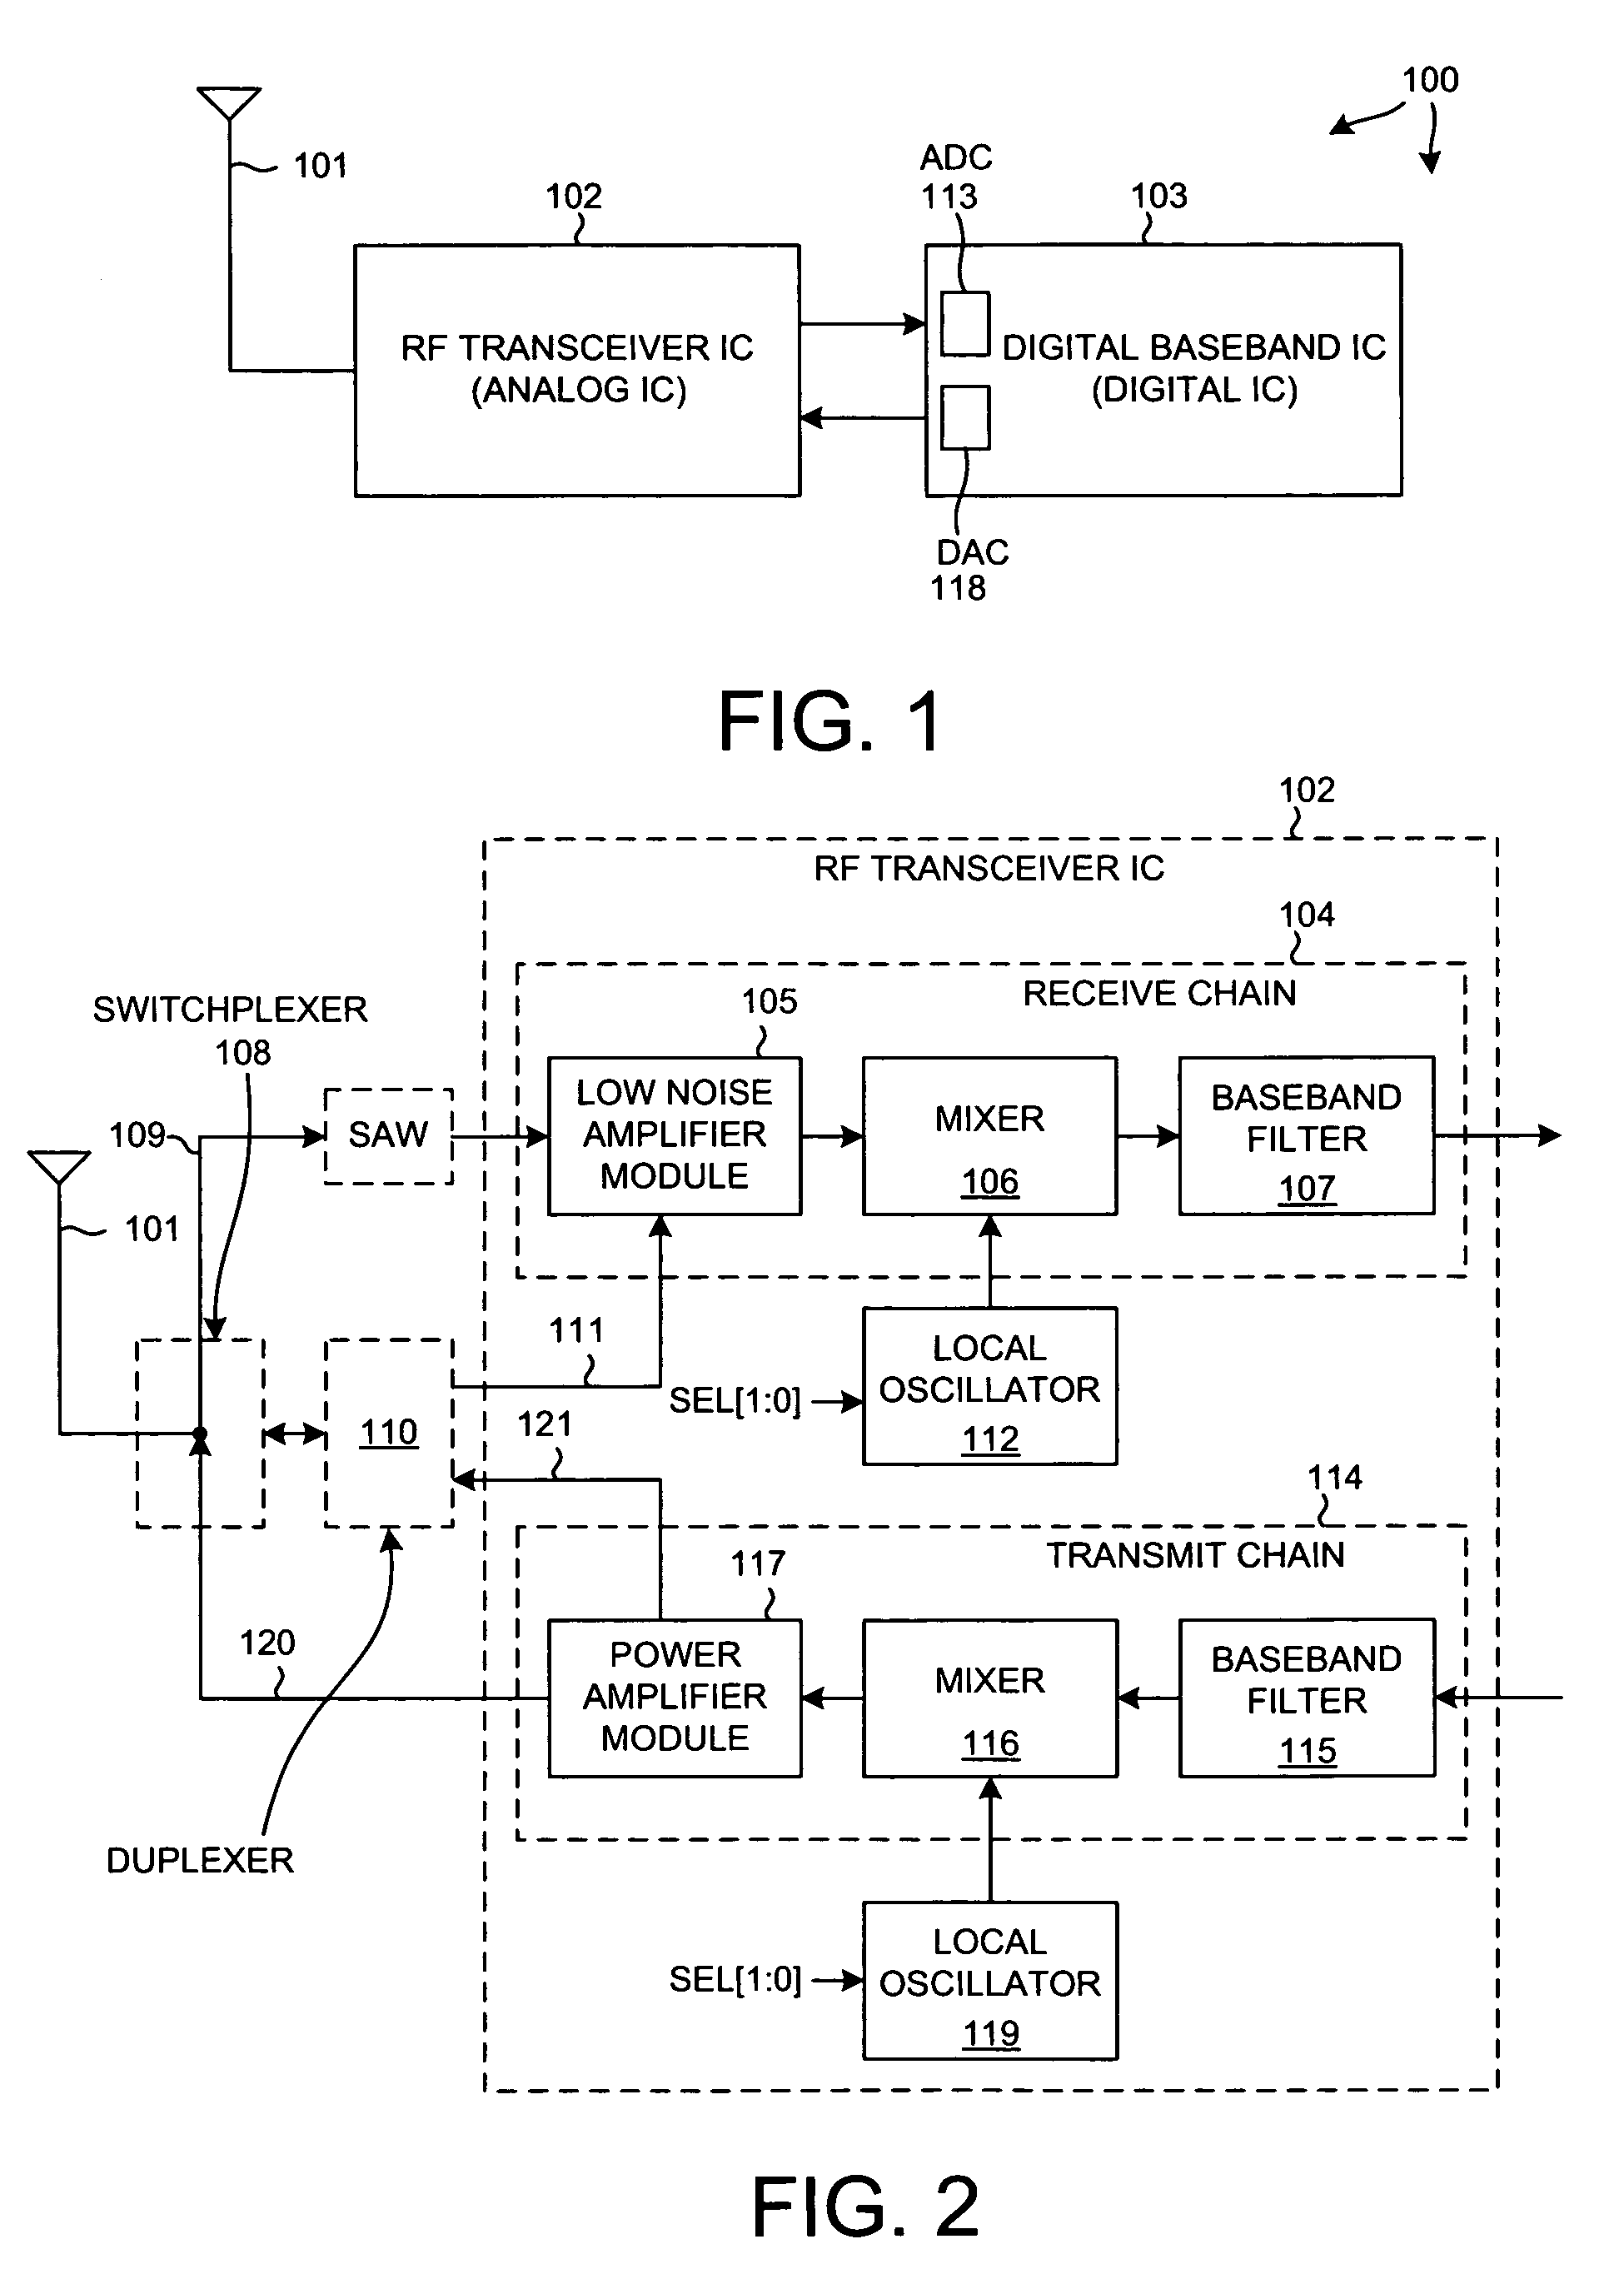 Configurable multi-modulus frequency divider for multi-mode mobile communication devices